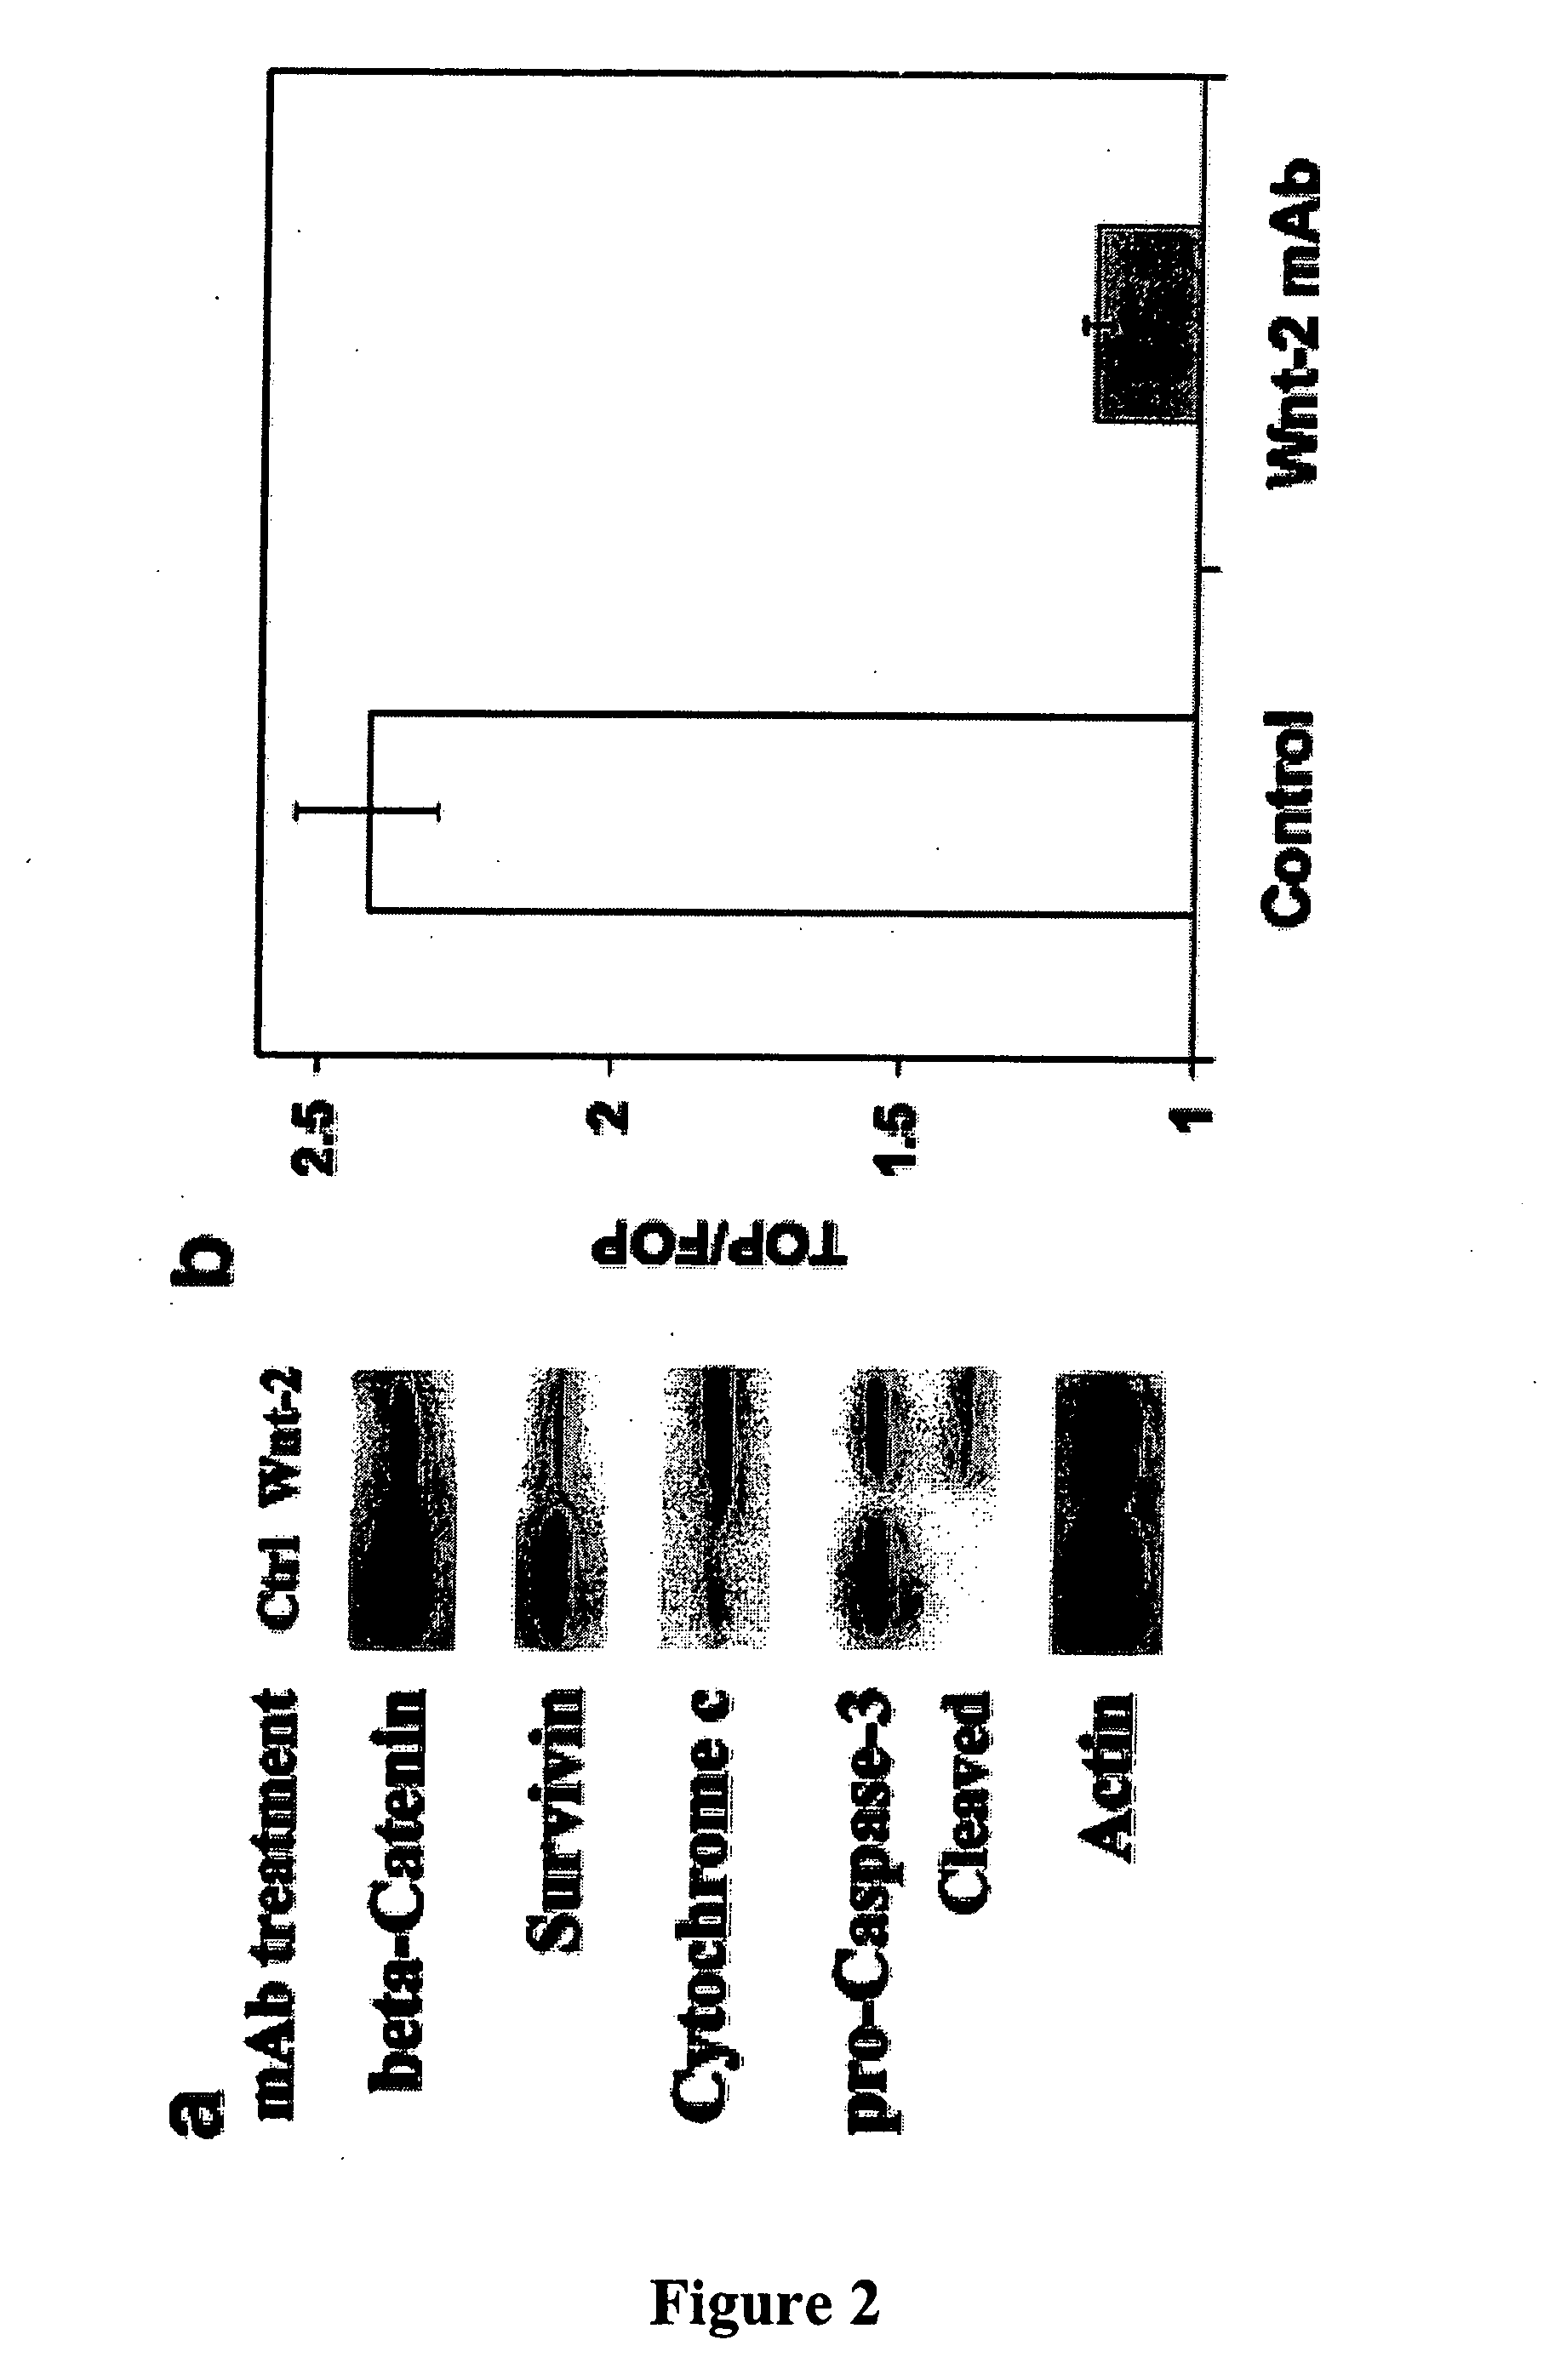 Methods for treating cancer using anti-Wnt2 monoclonal antibodies and siRNA